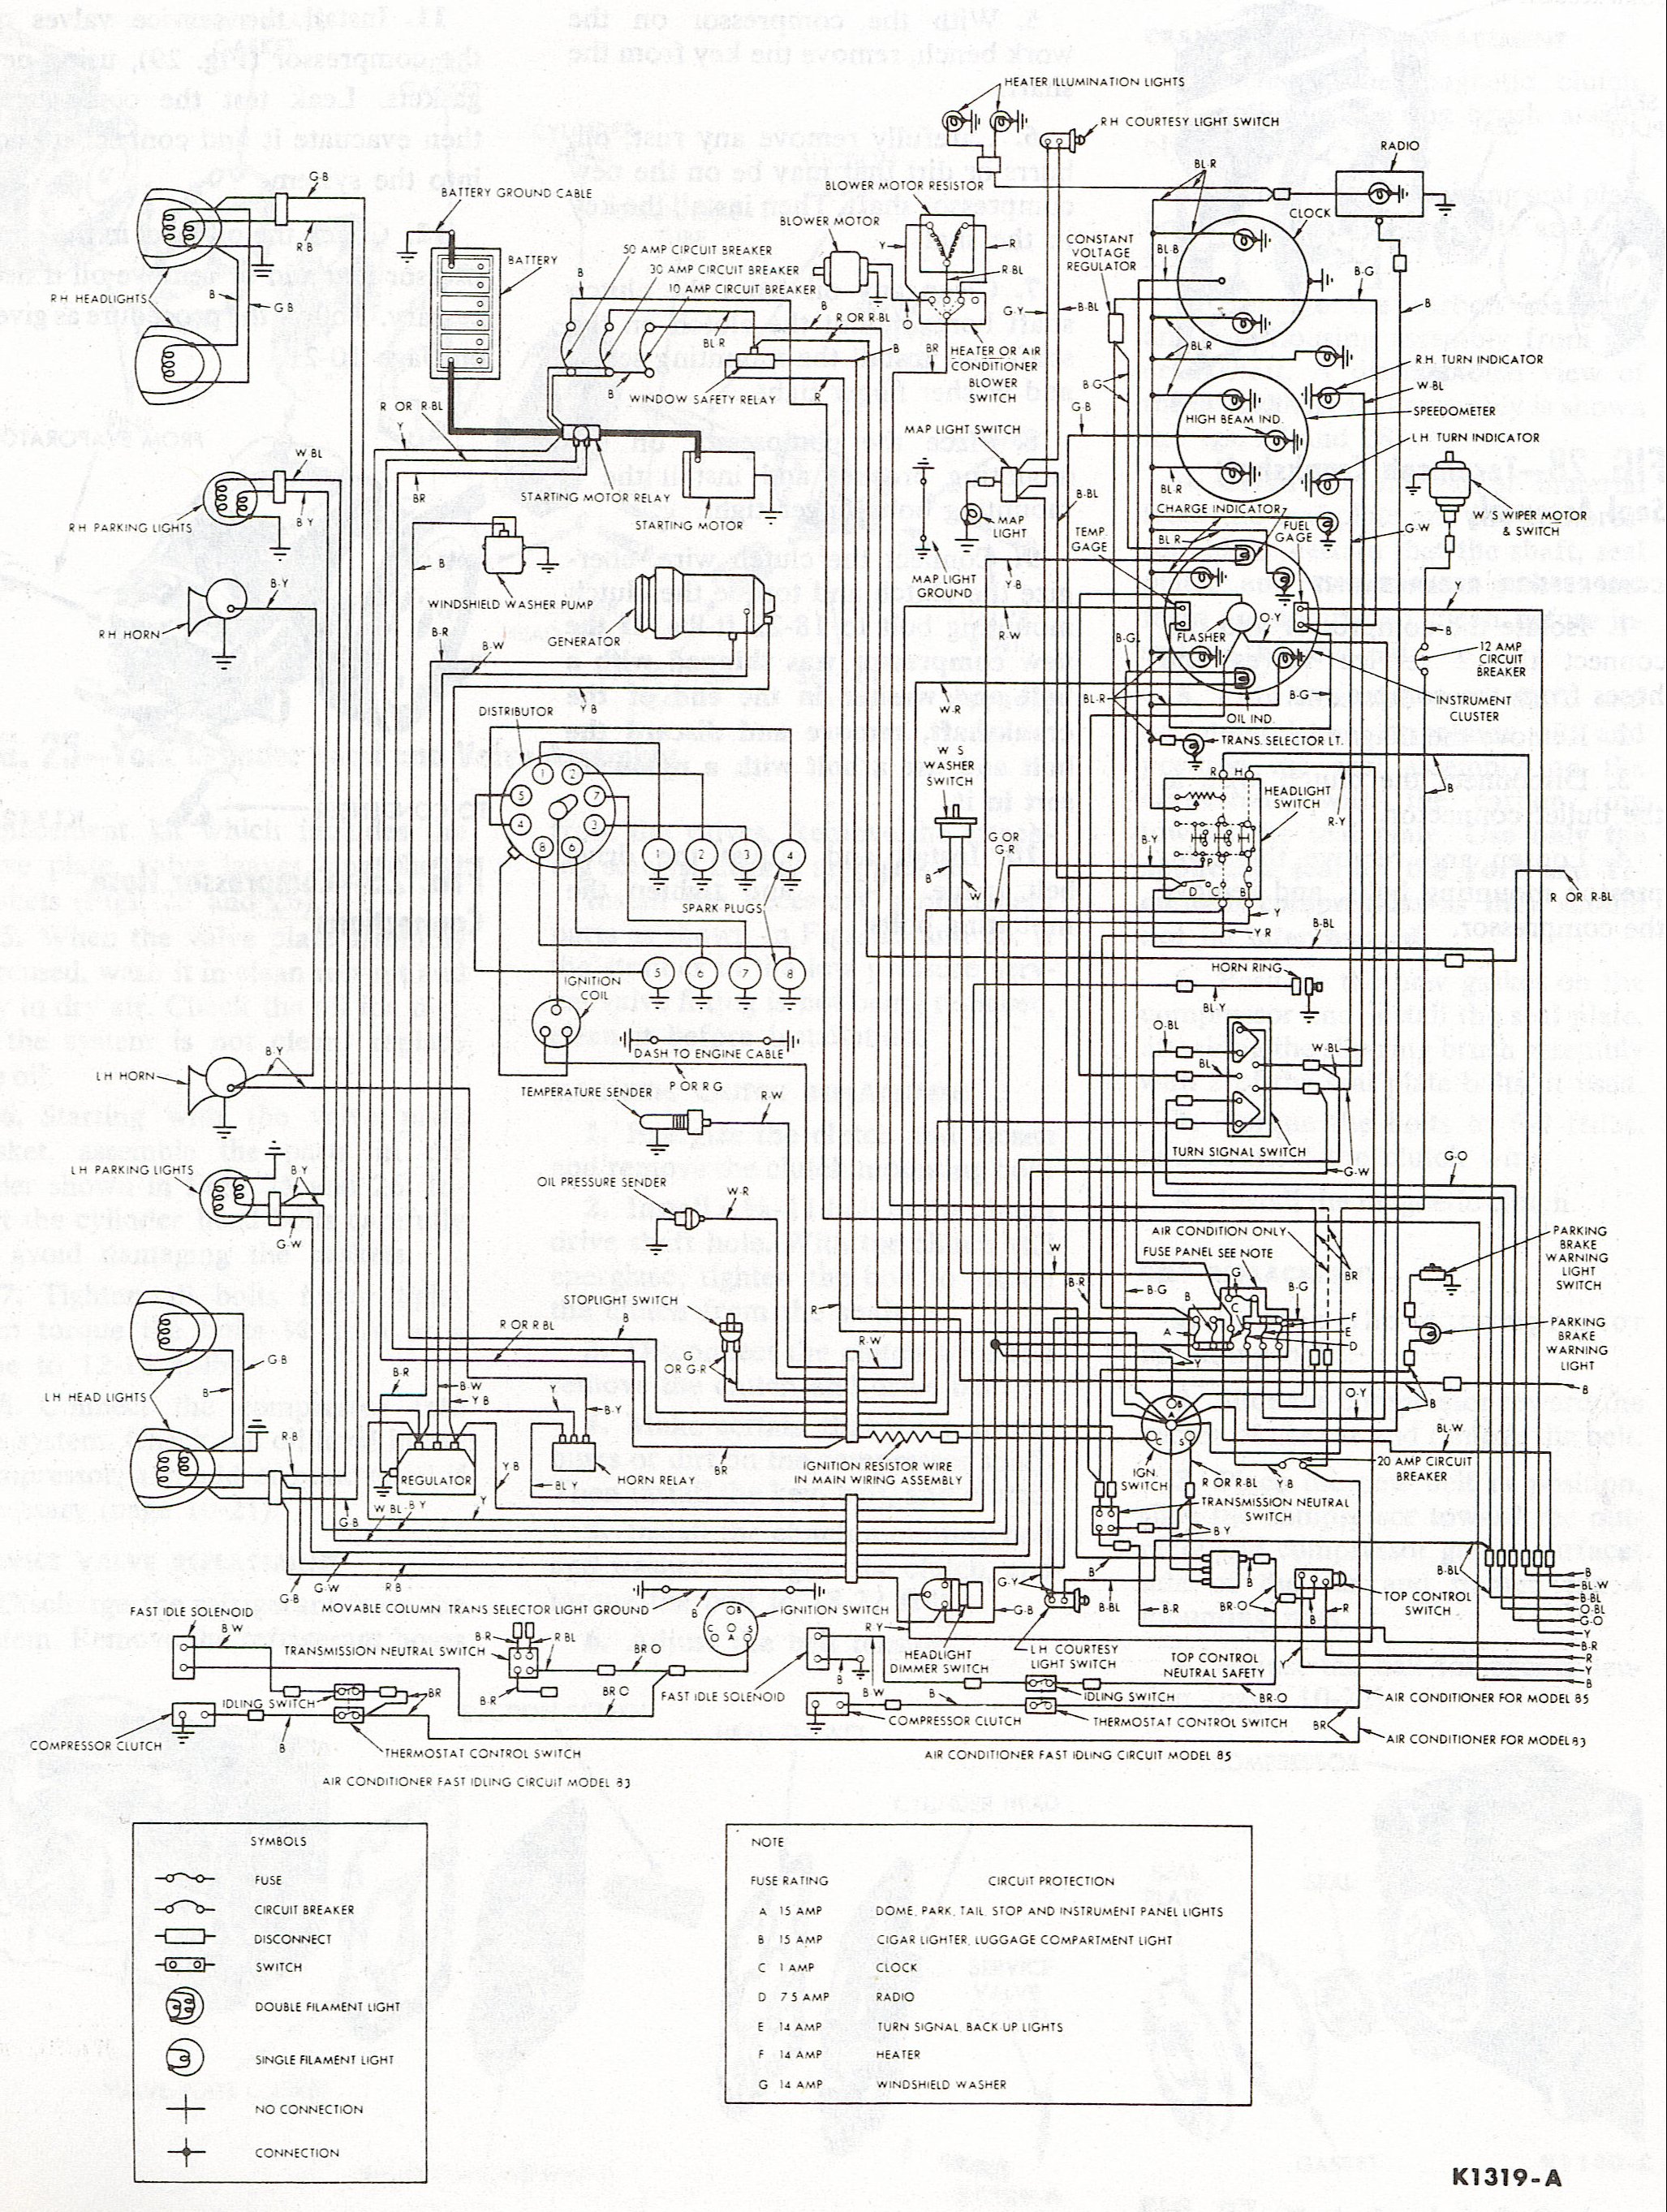 1962 WIRING DIAGRAM, FRONT